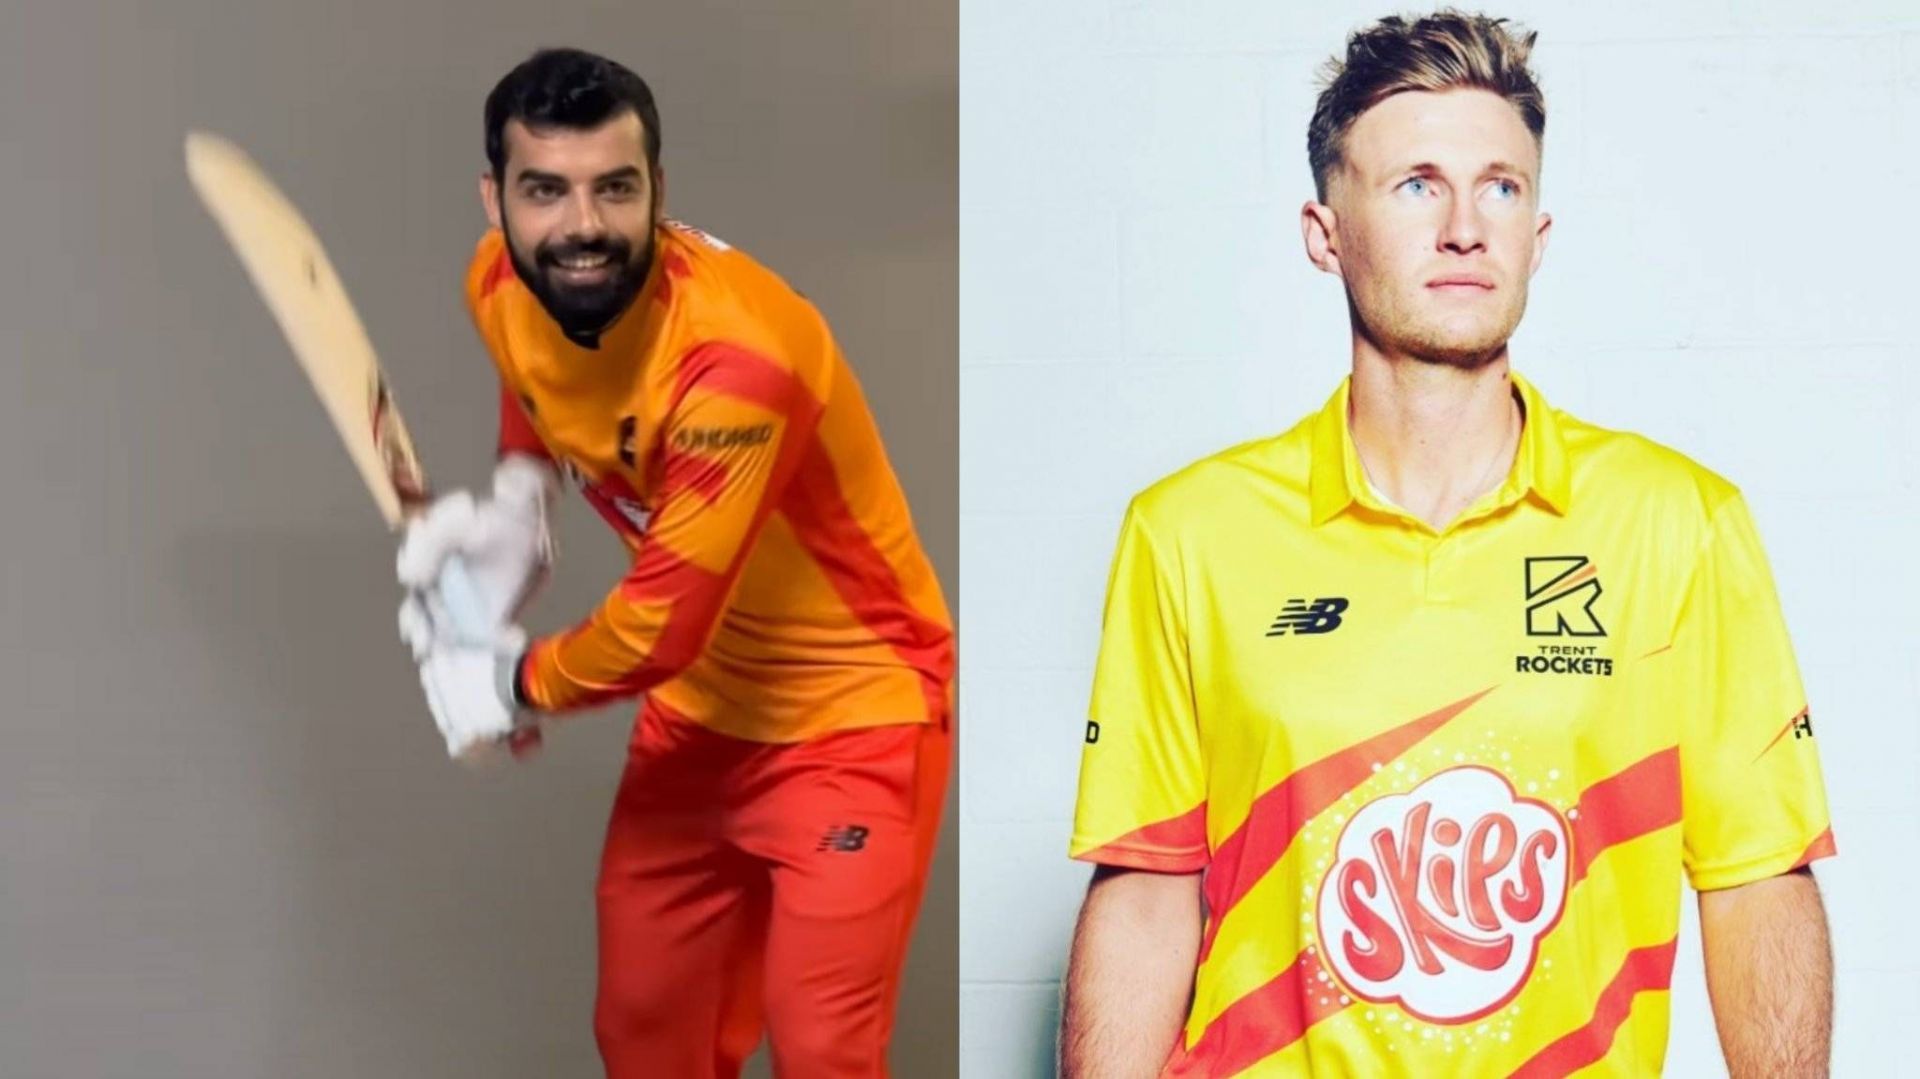 All eyes will be on Joe Root and Shadab Khan in The Hundred (Image: Instagram)